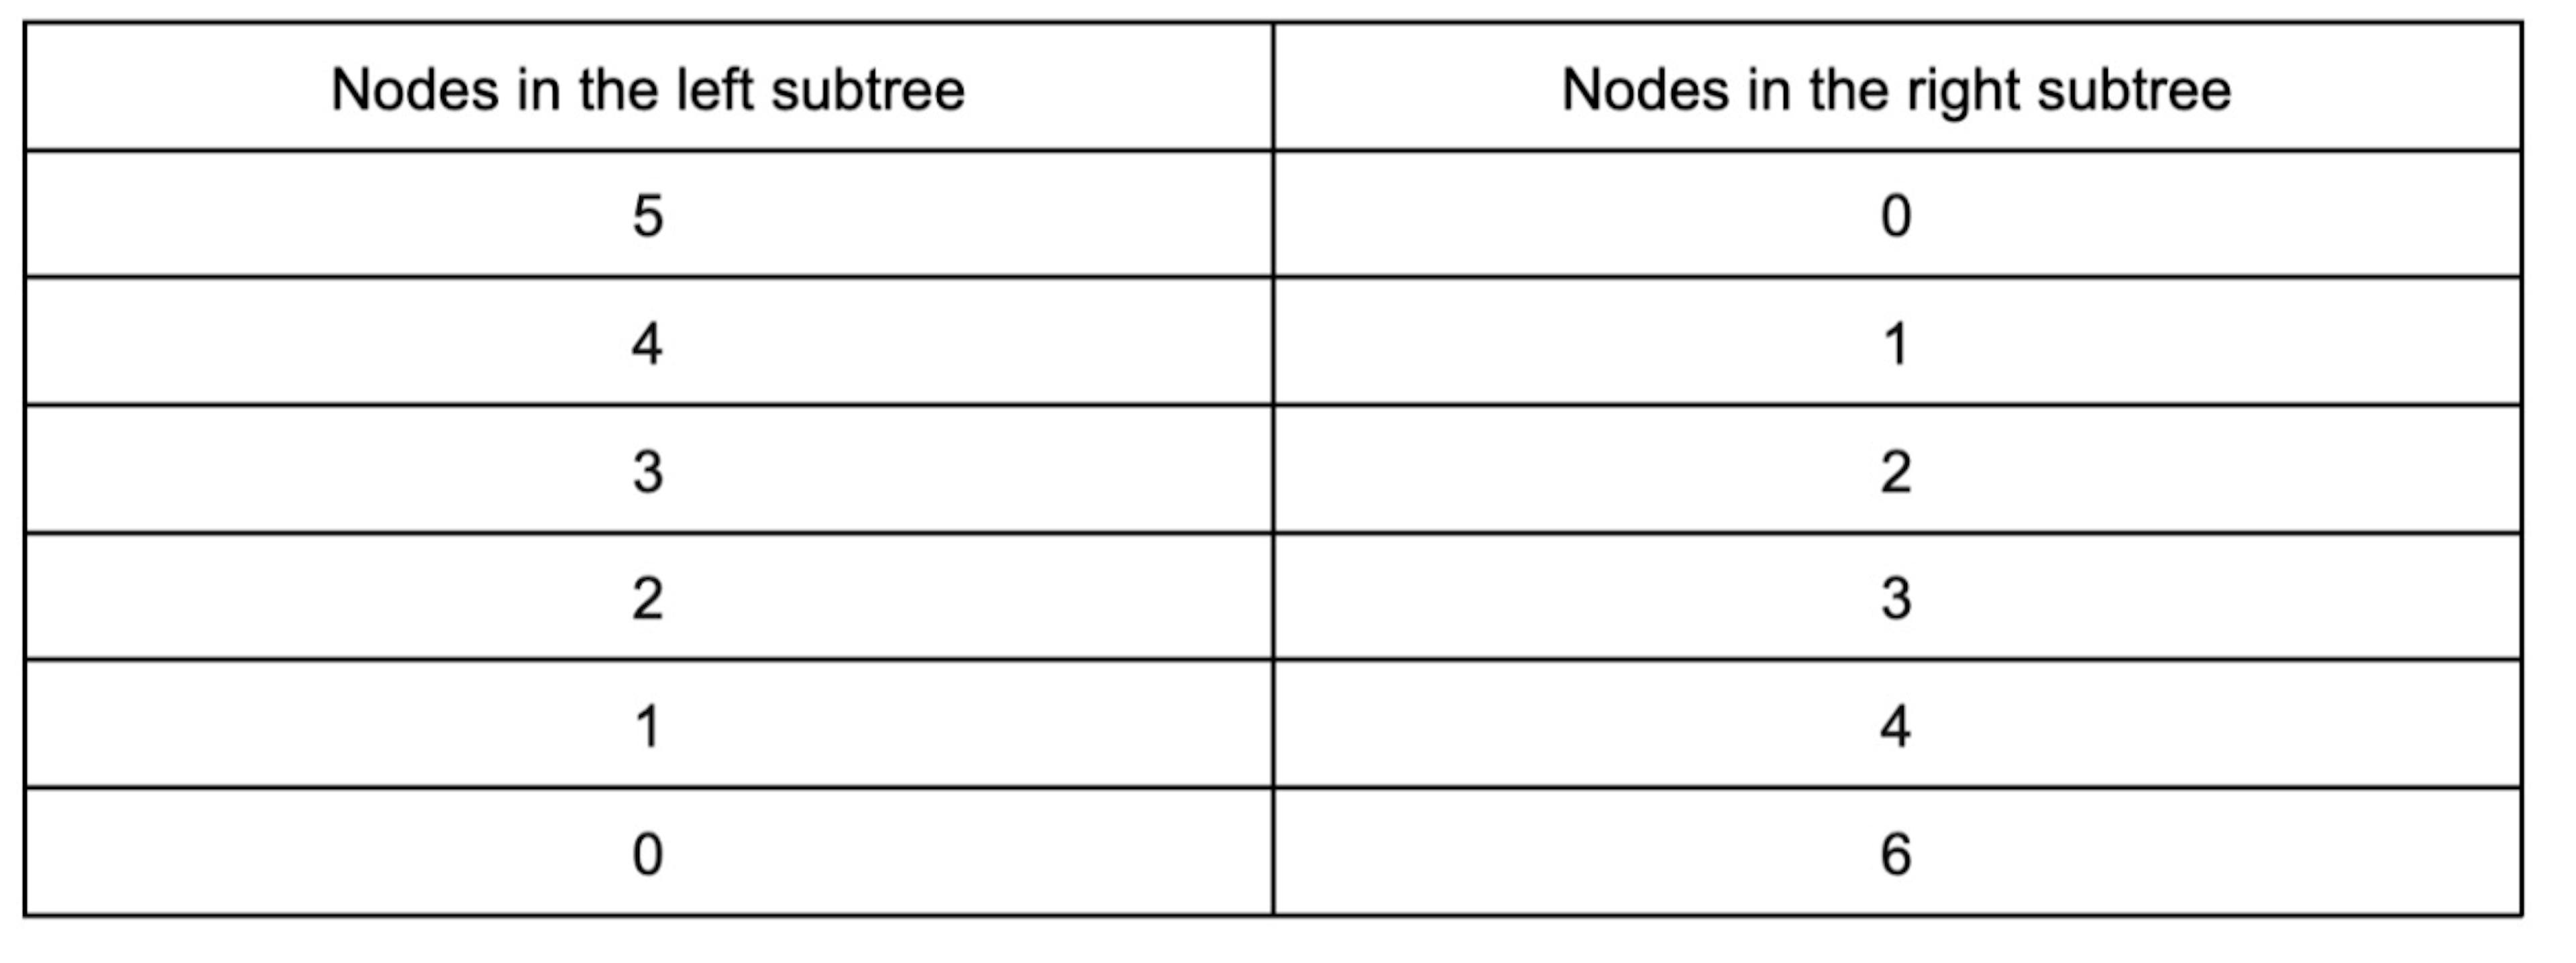 Variants for Distributing our Nodes